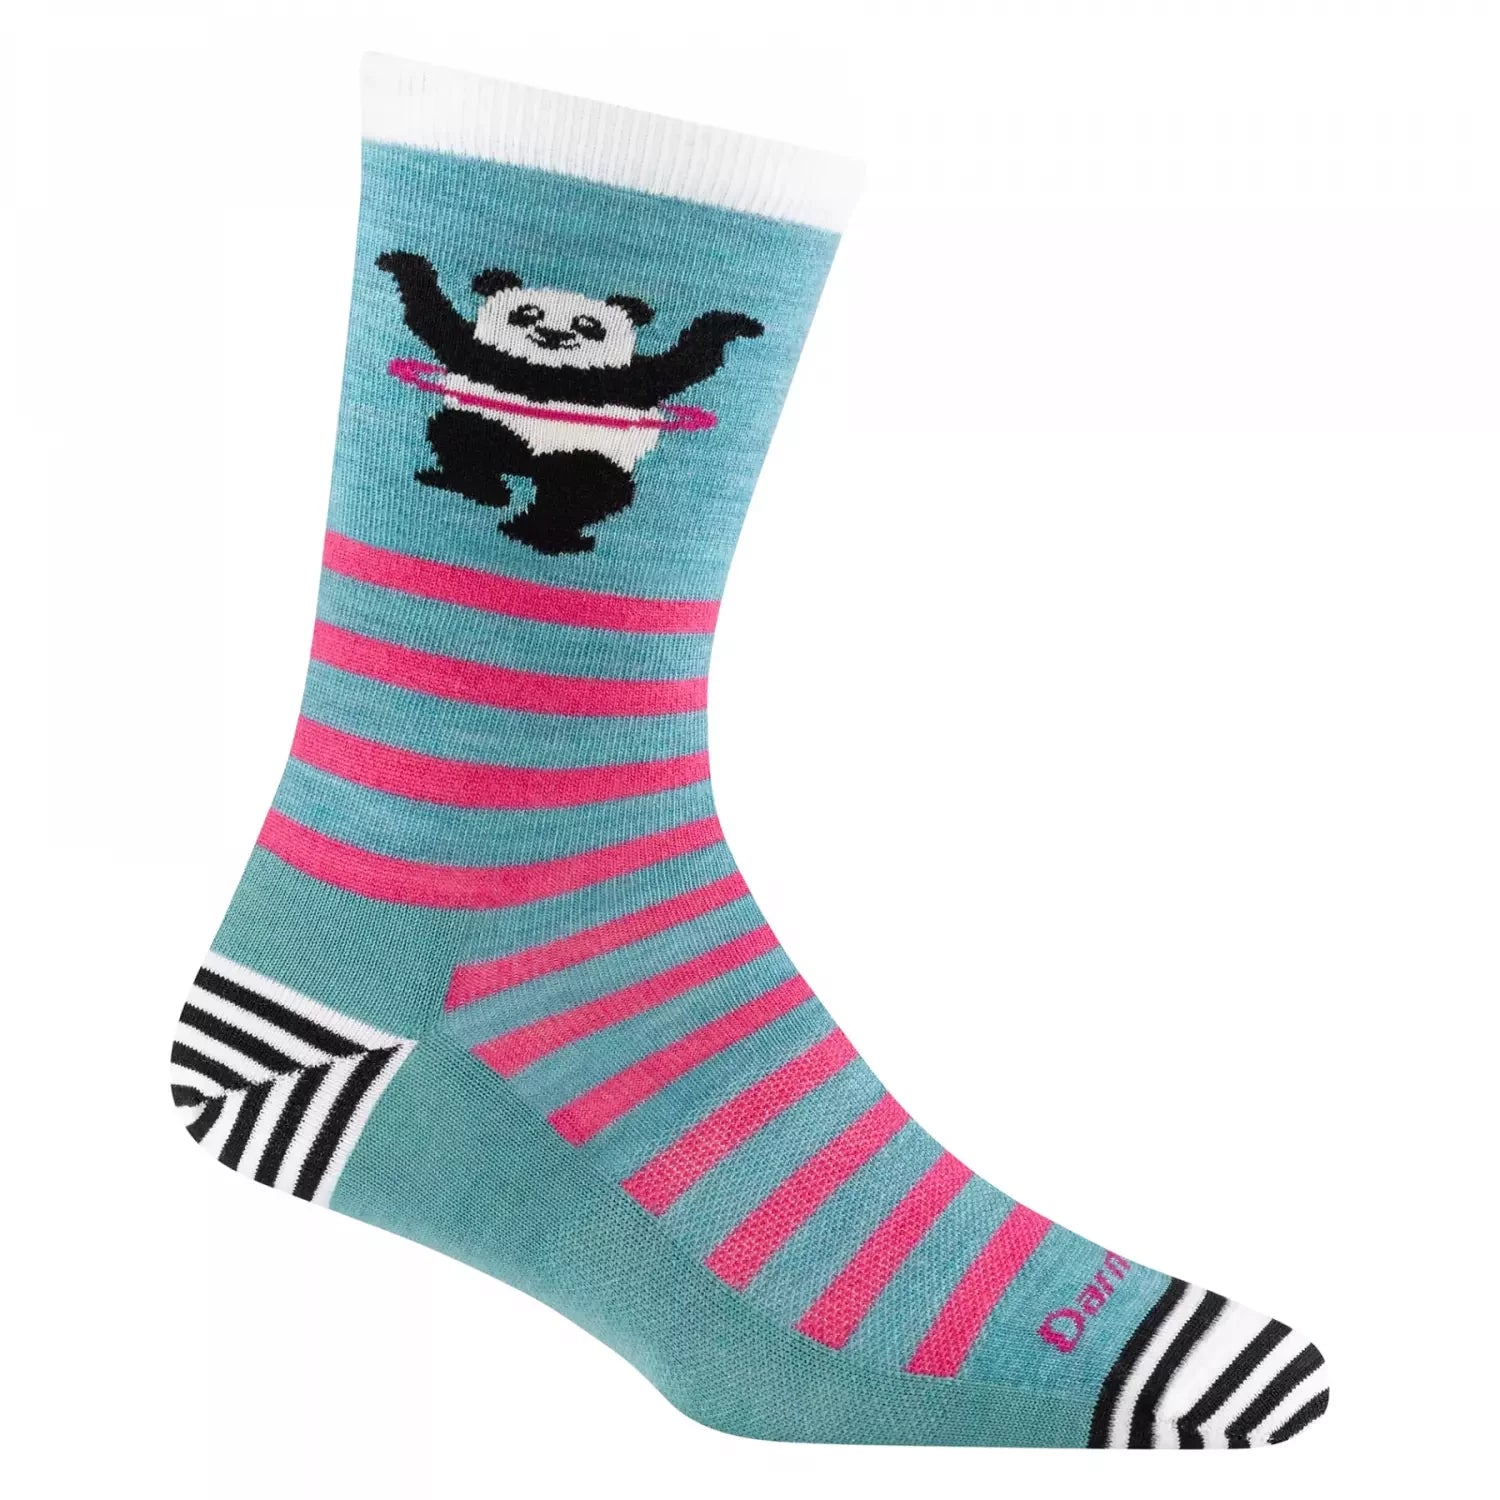 Darn Tough Women's Animal Haus Crew Lightweight Lifestyle Sock shown in the Lagoon color option.